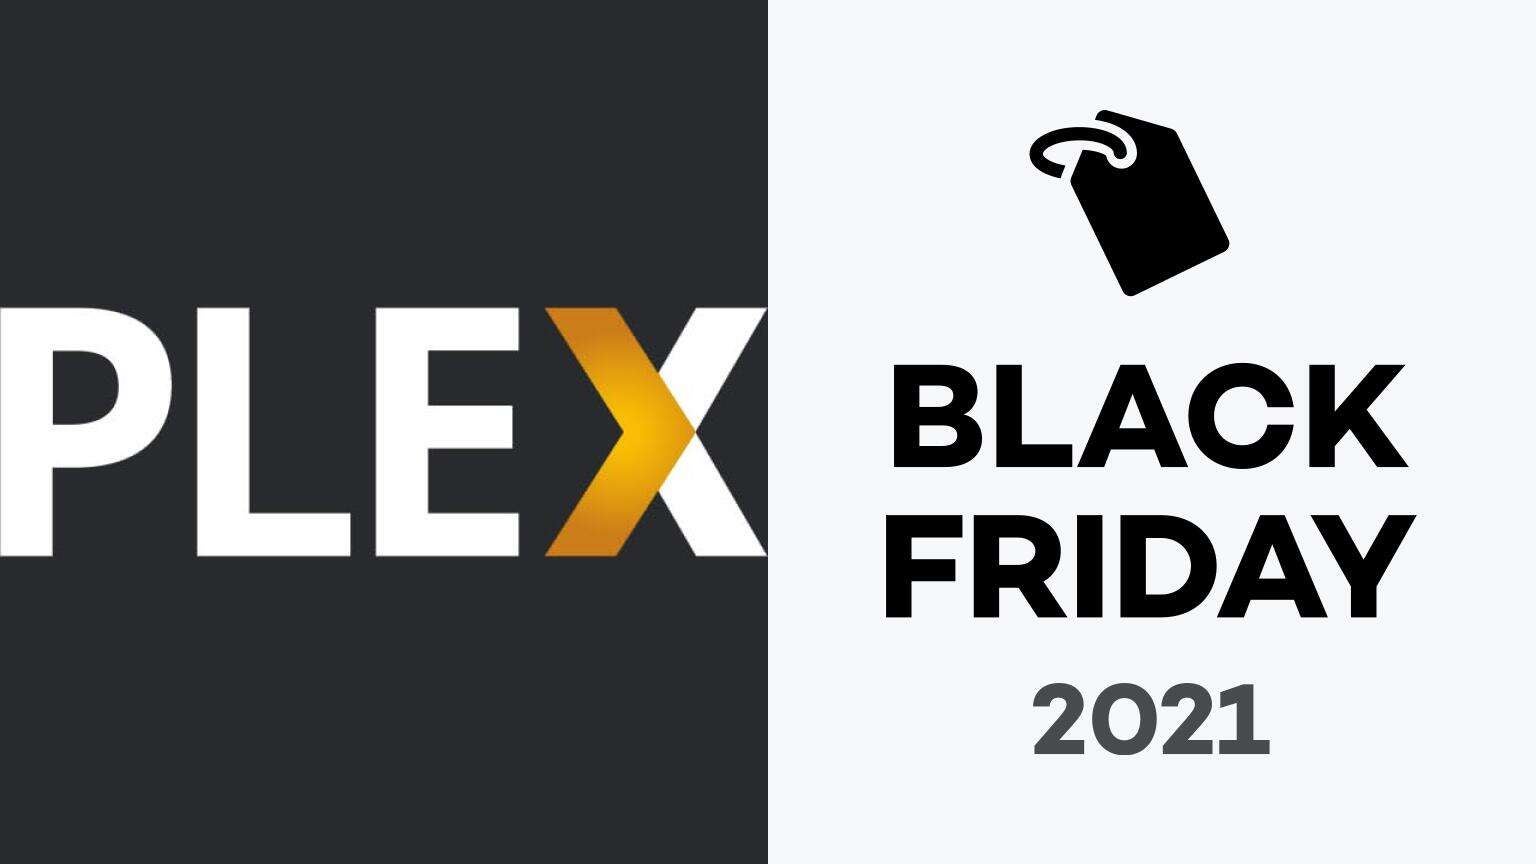 Plex Black Friday Deals and Sales What Are the Best Ways to Save